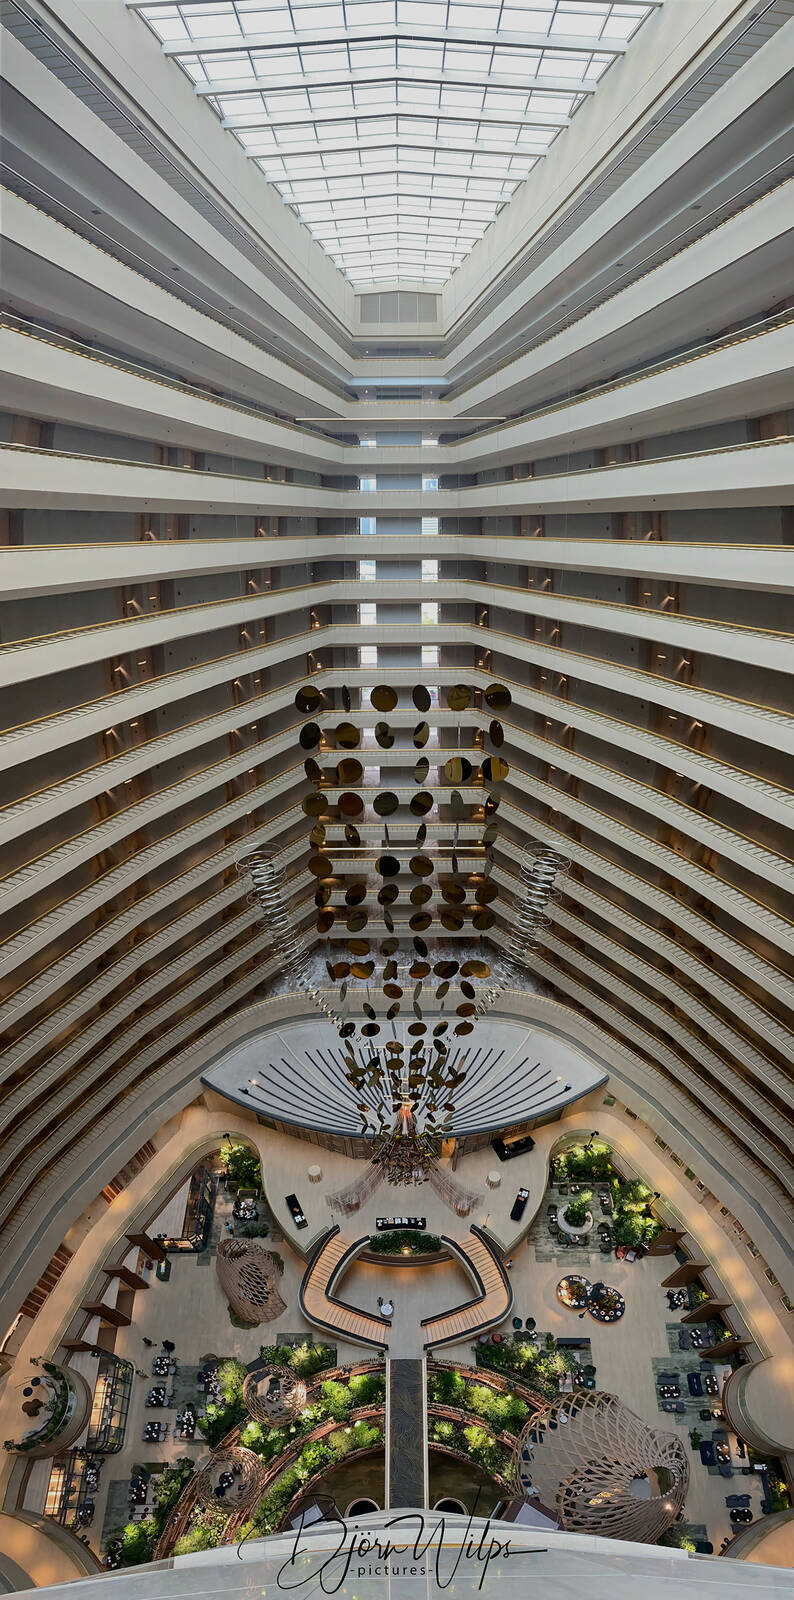 Image of Parkroyal Collection Hotel by Bjoern Wilps